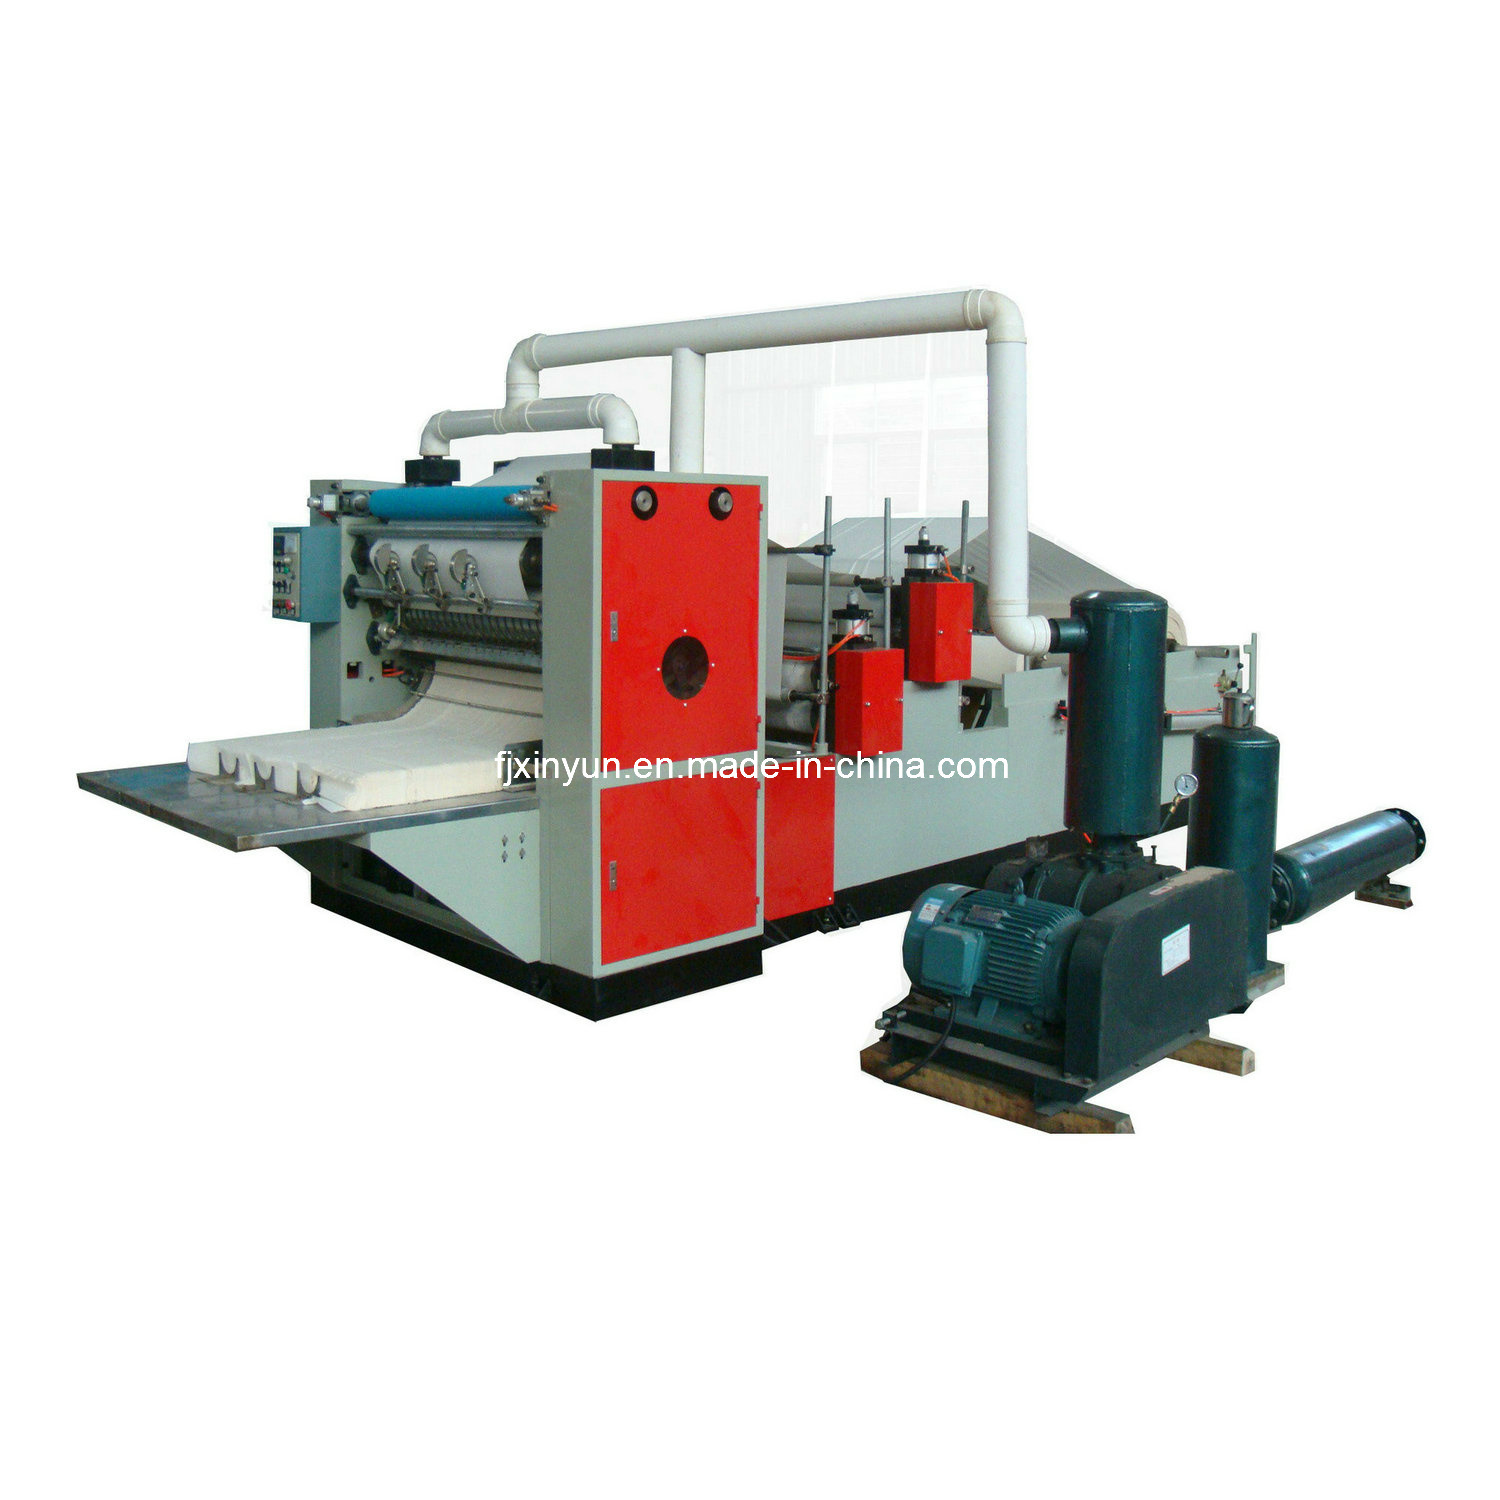 4lines Automatic V-Folded Hand Towel Paper Making Machine (XY-BT-288)